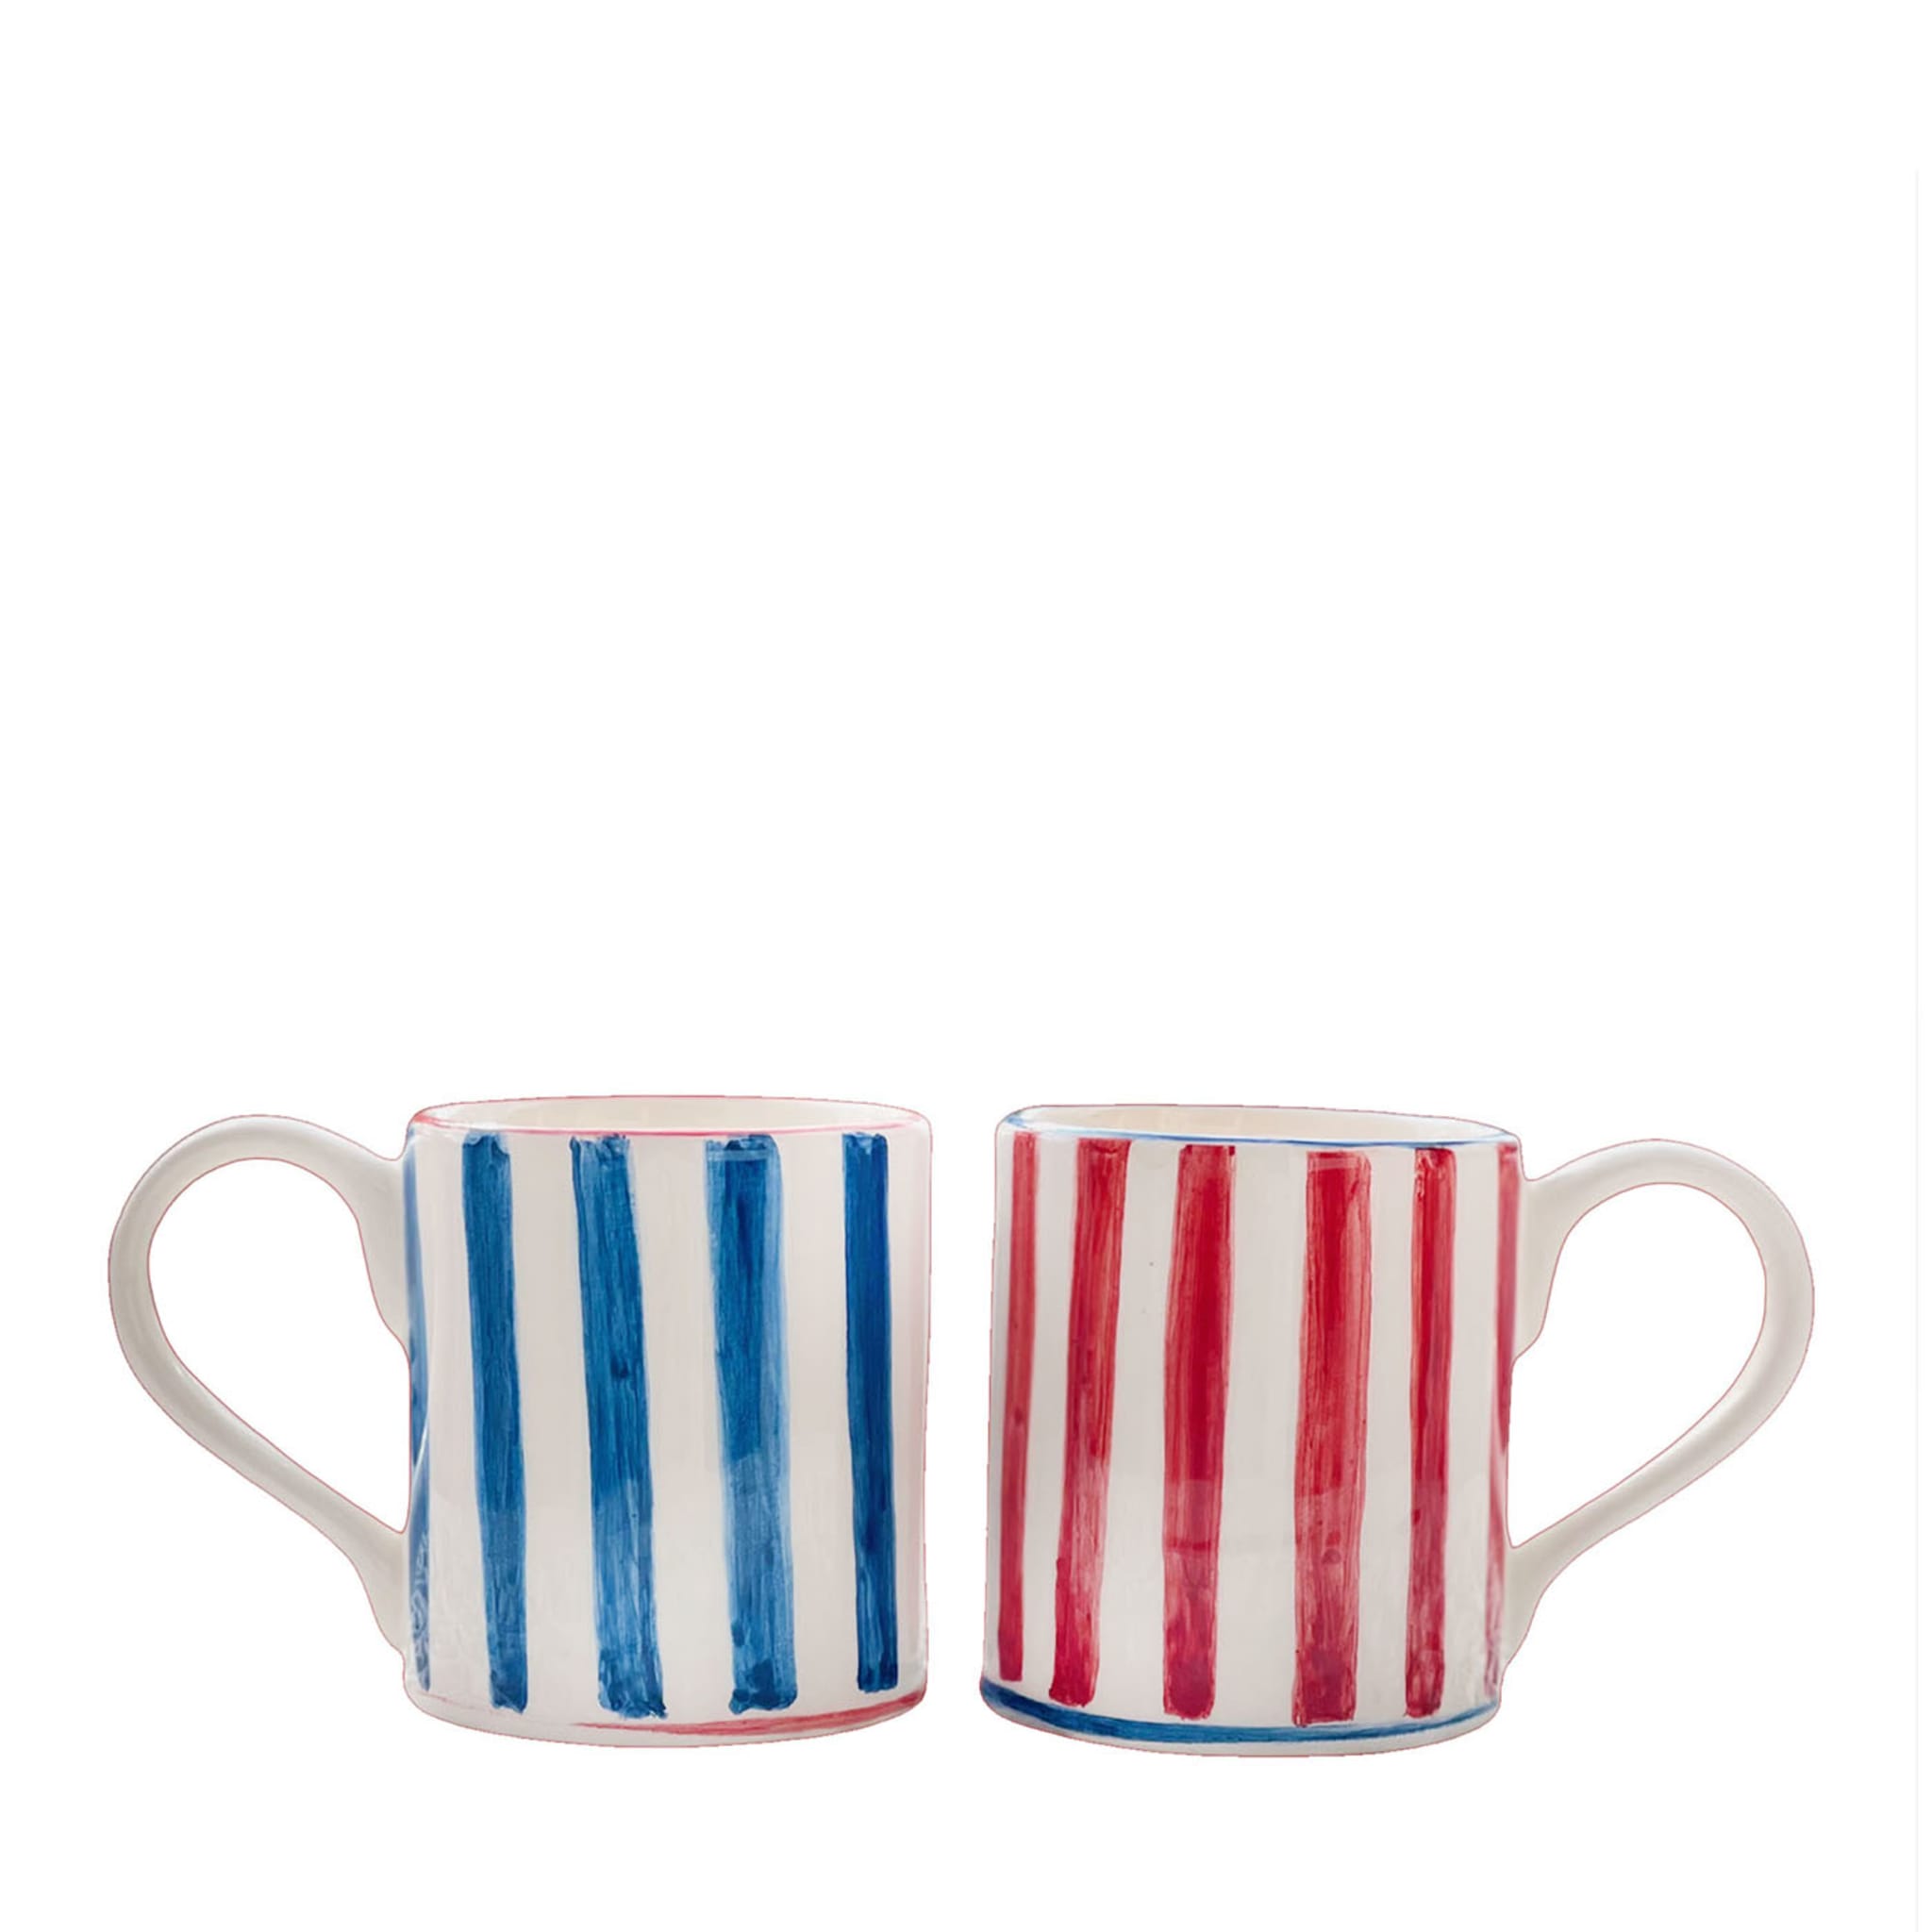 Set of 6 Ceramic Red and Blue Mugs - Main view